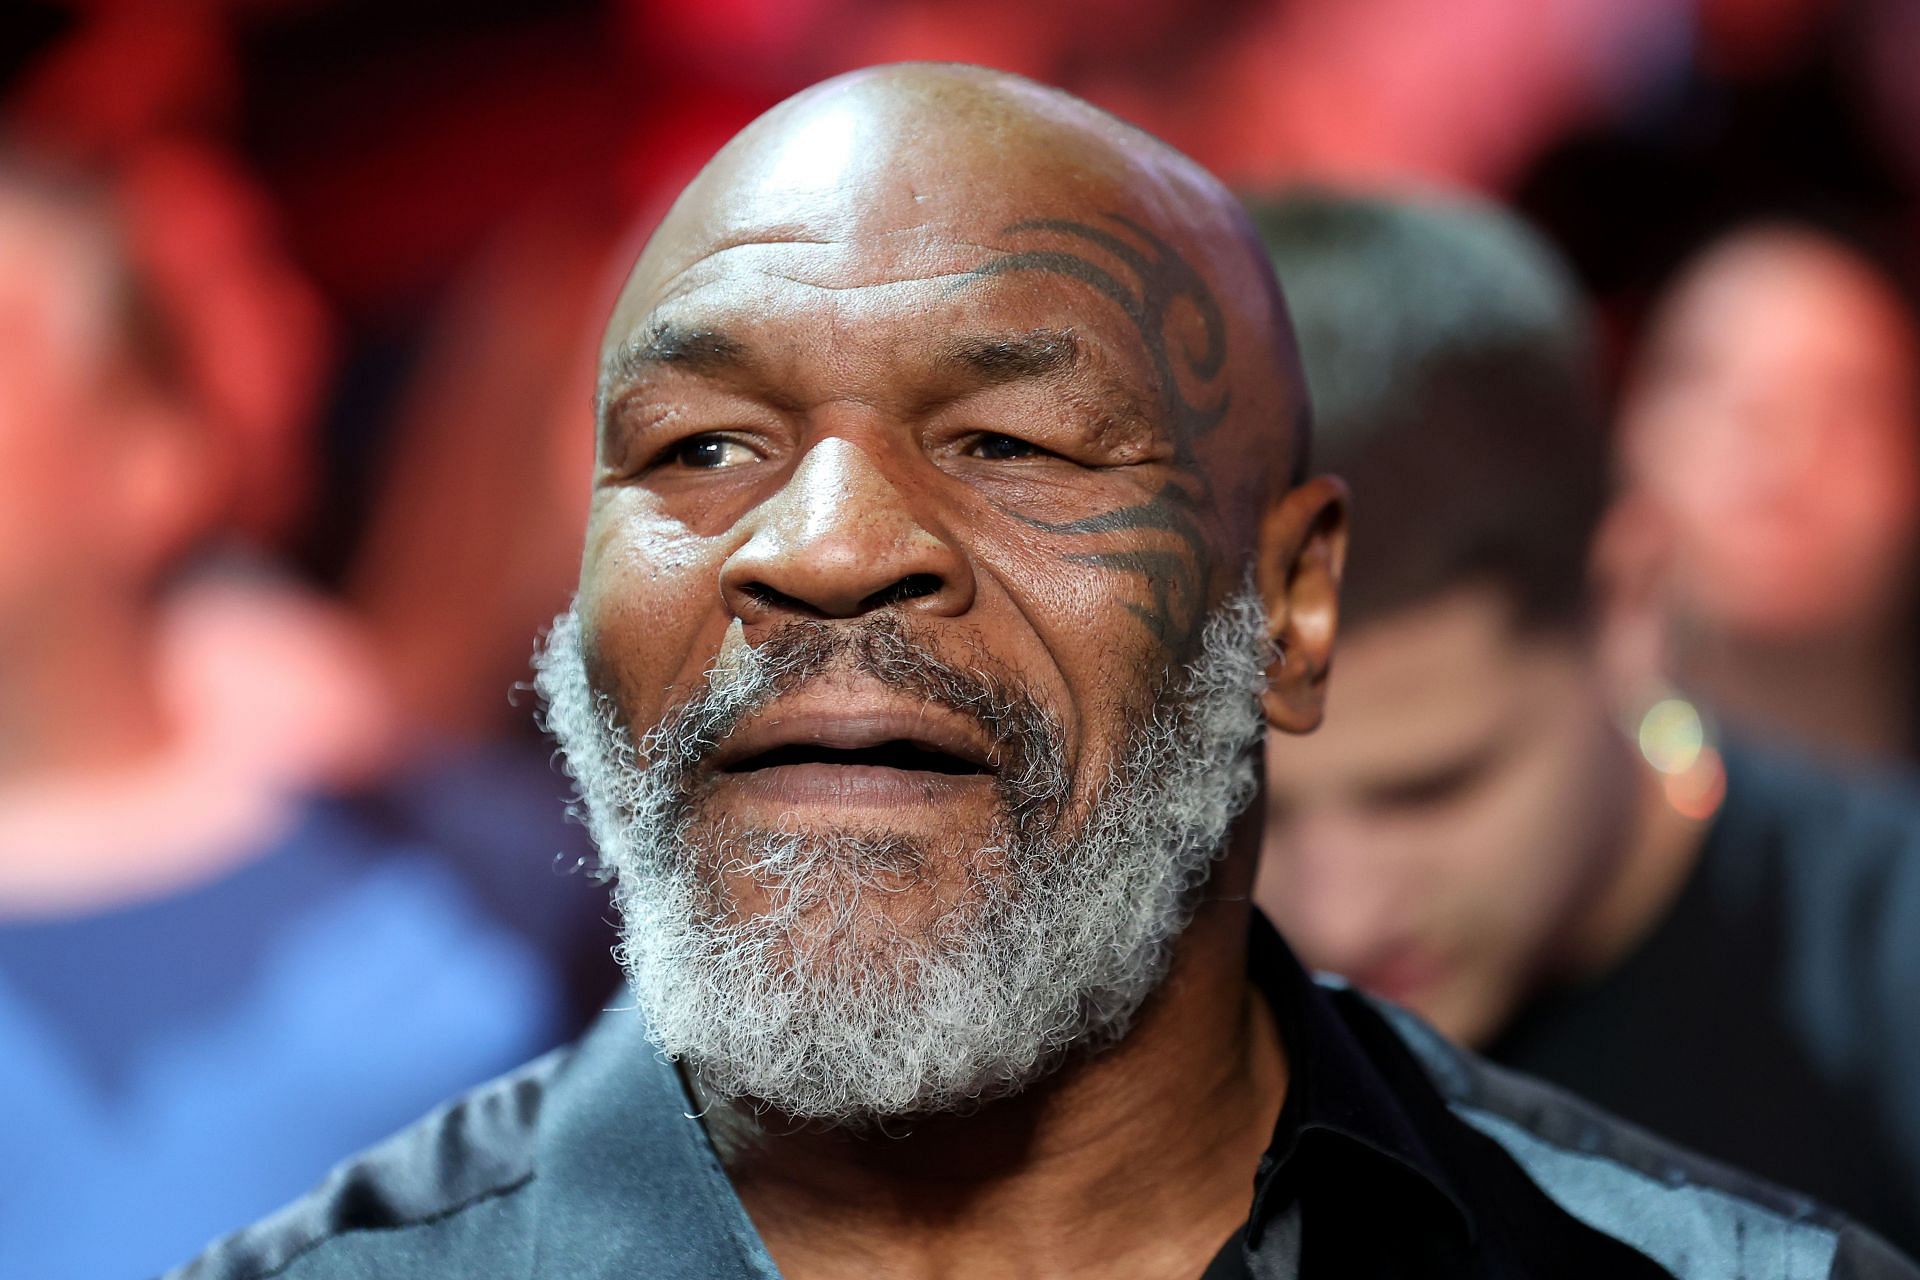 Mike Tyson owned three wild cats during his heydays